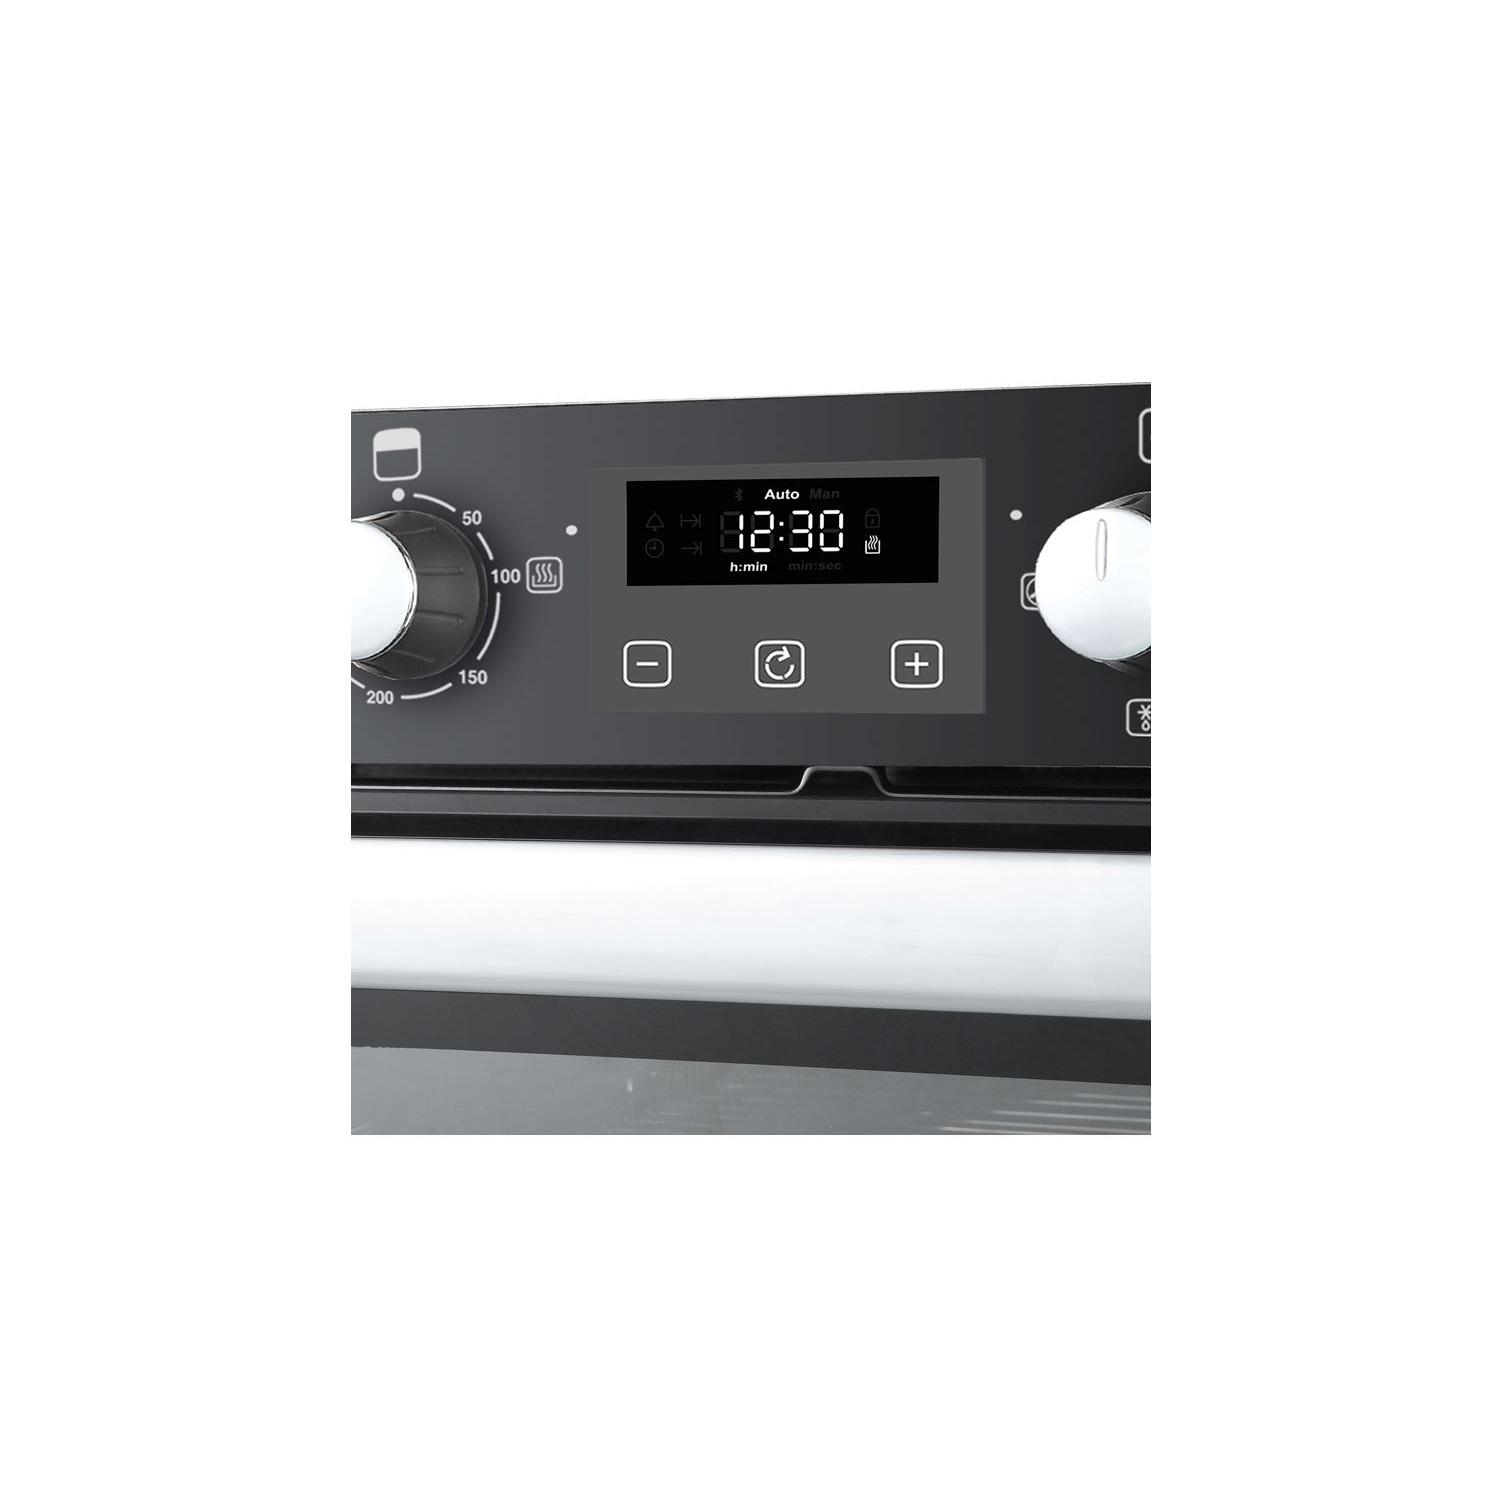 Belling 55cm Electric Double Oven - Stainless Steel - A Rated - 1